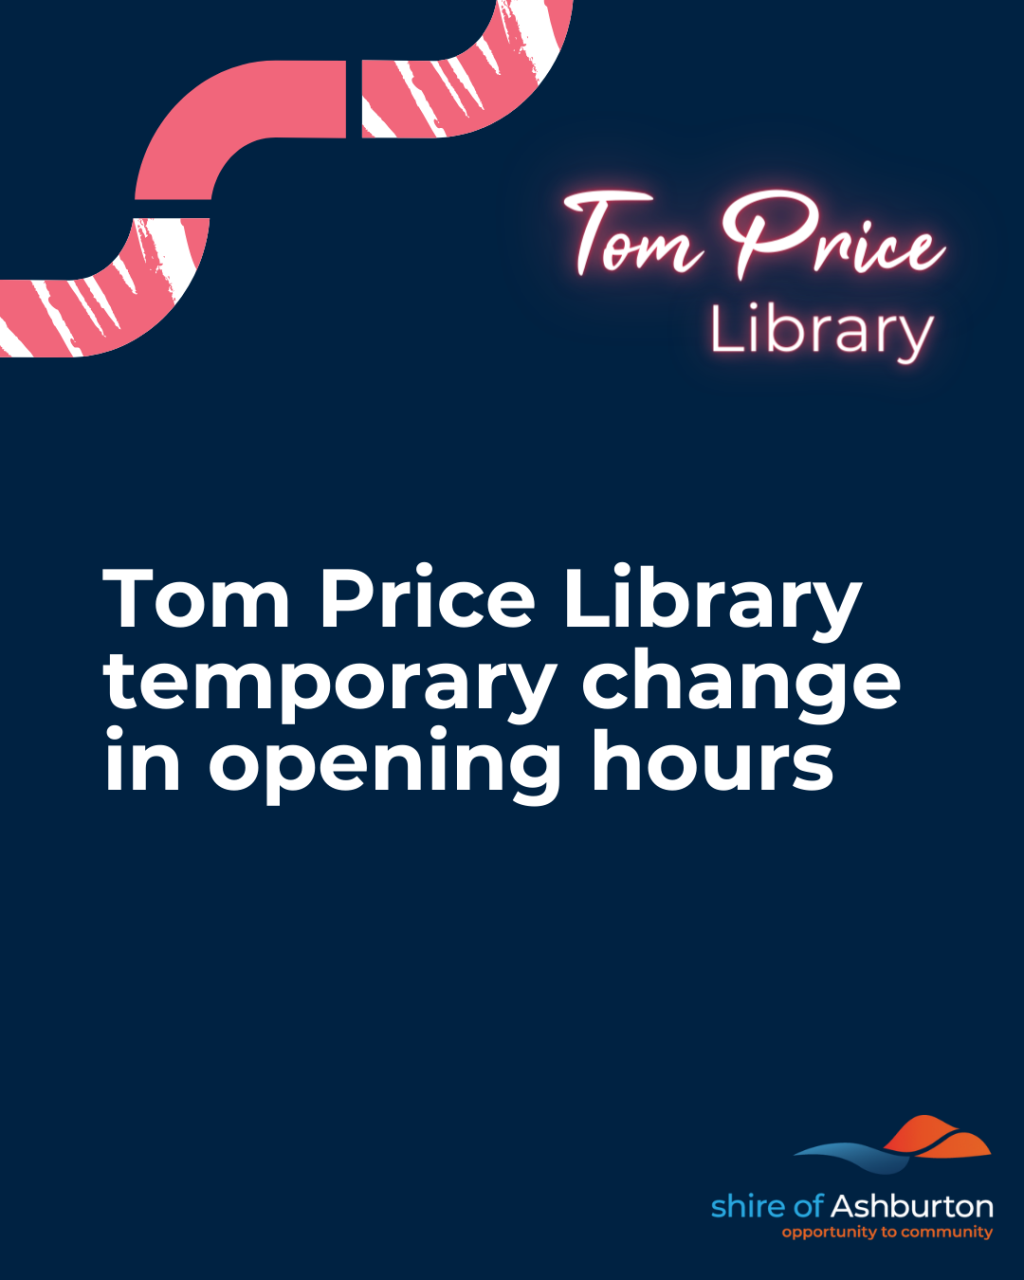 Tom Price Library Temporary Change in Opening Hours